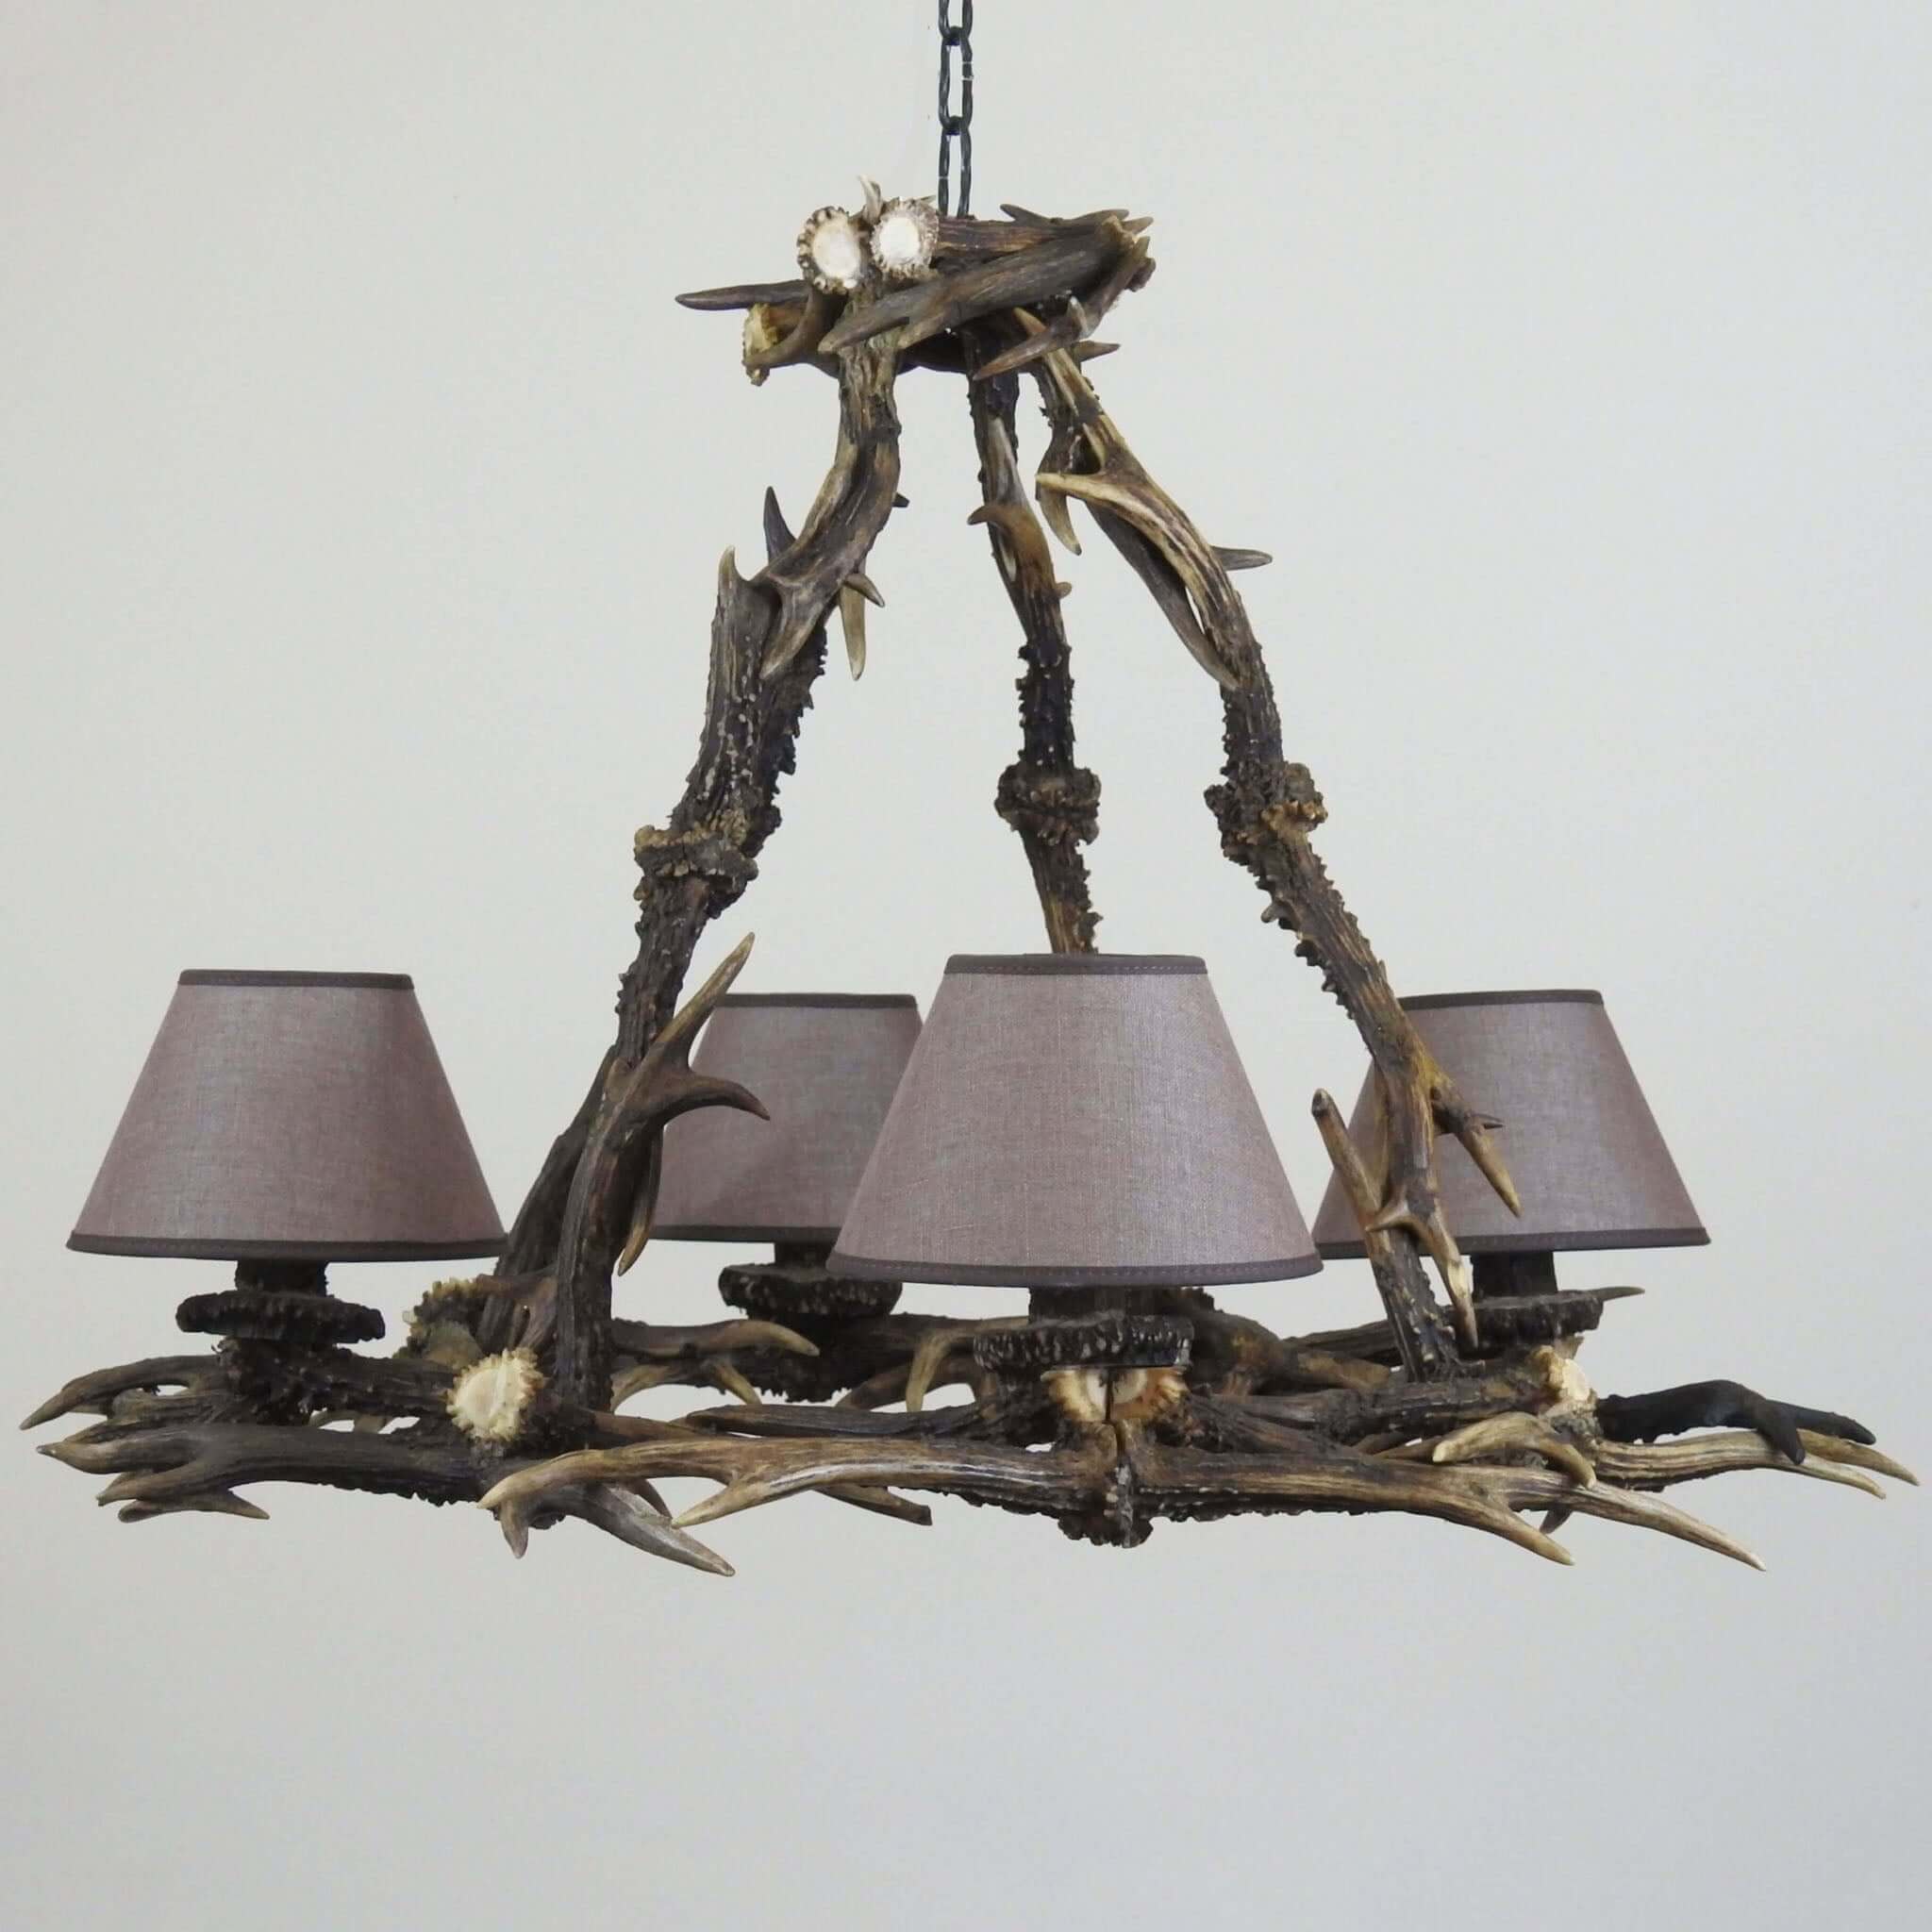 Farmhouse antler chandelier with brown shades.